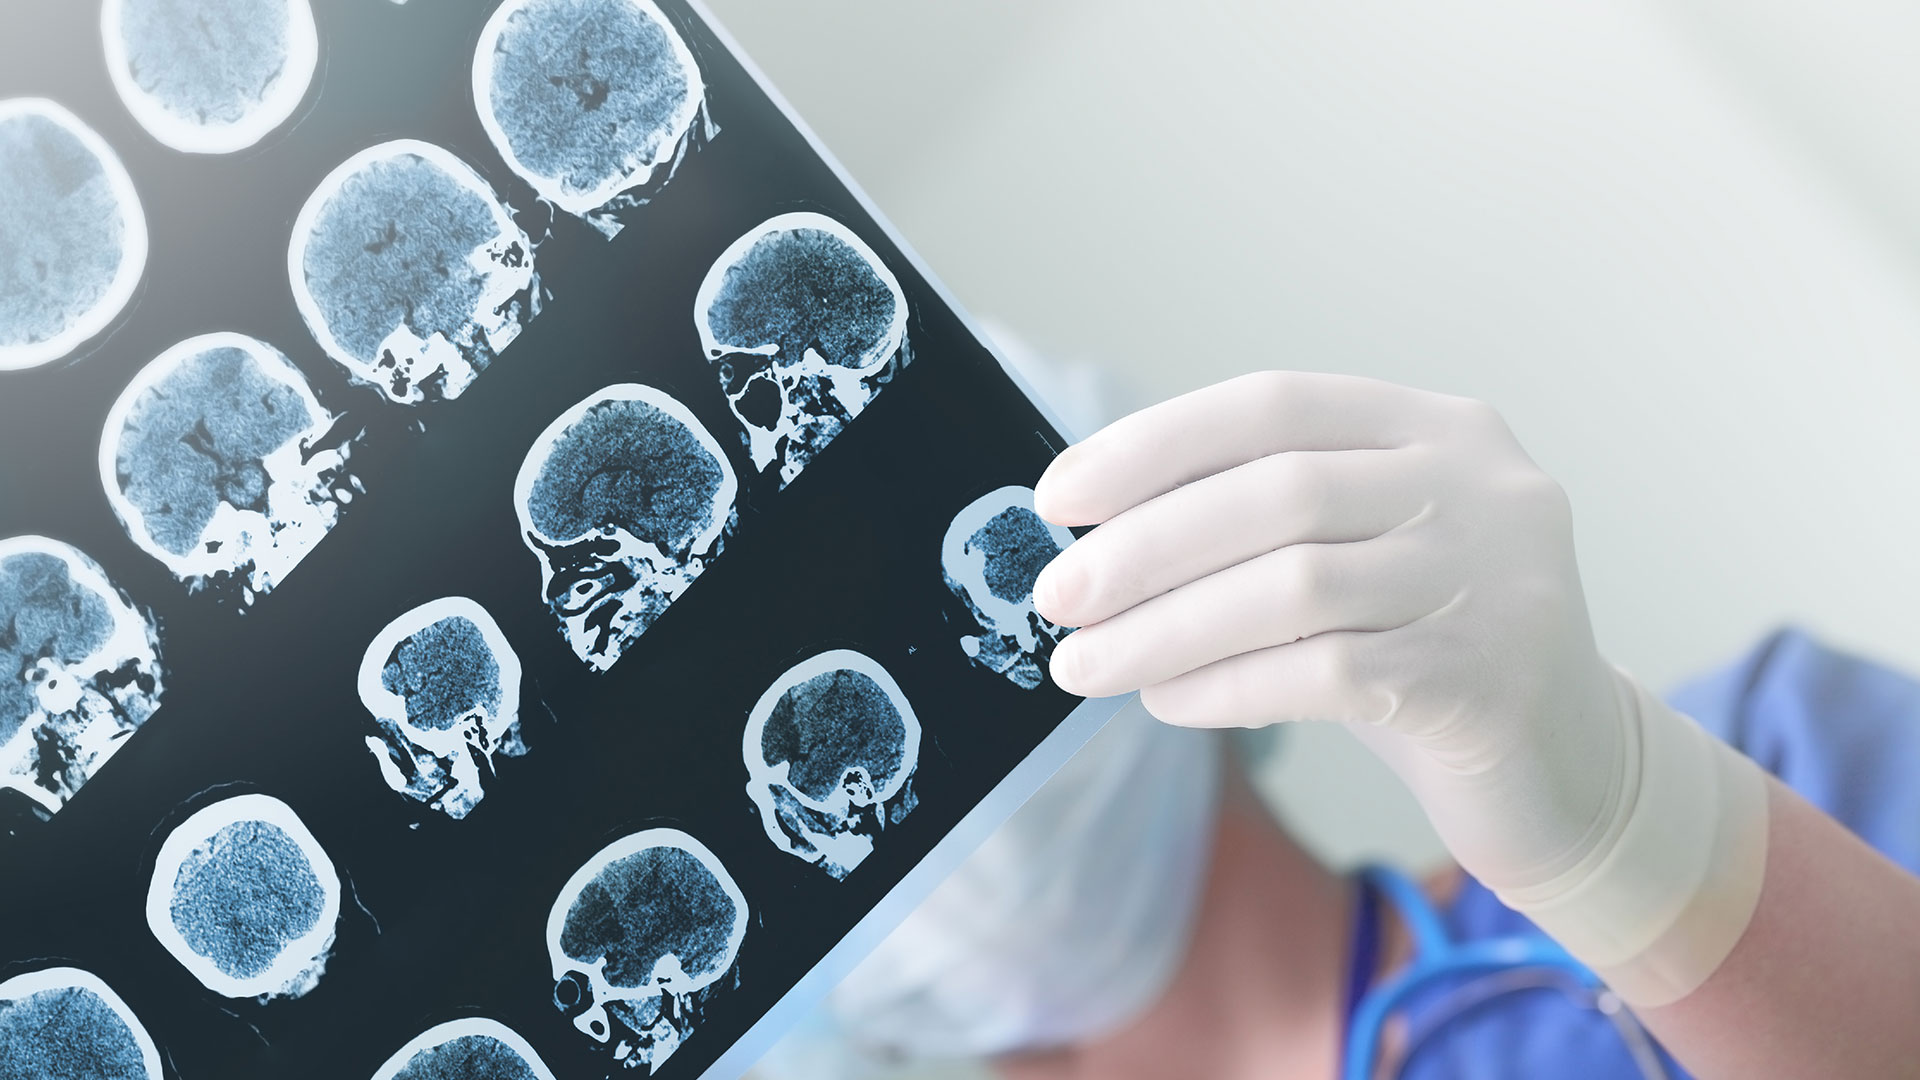 Massachusetts General Hospital recently developed an accurate method for the detection of Alzheimer's that is based on clinical brain samples collected in the form of images in routine examinations (Getty)